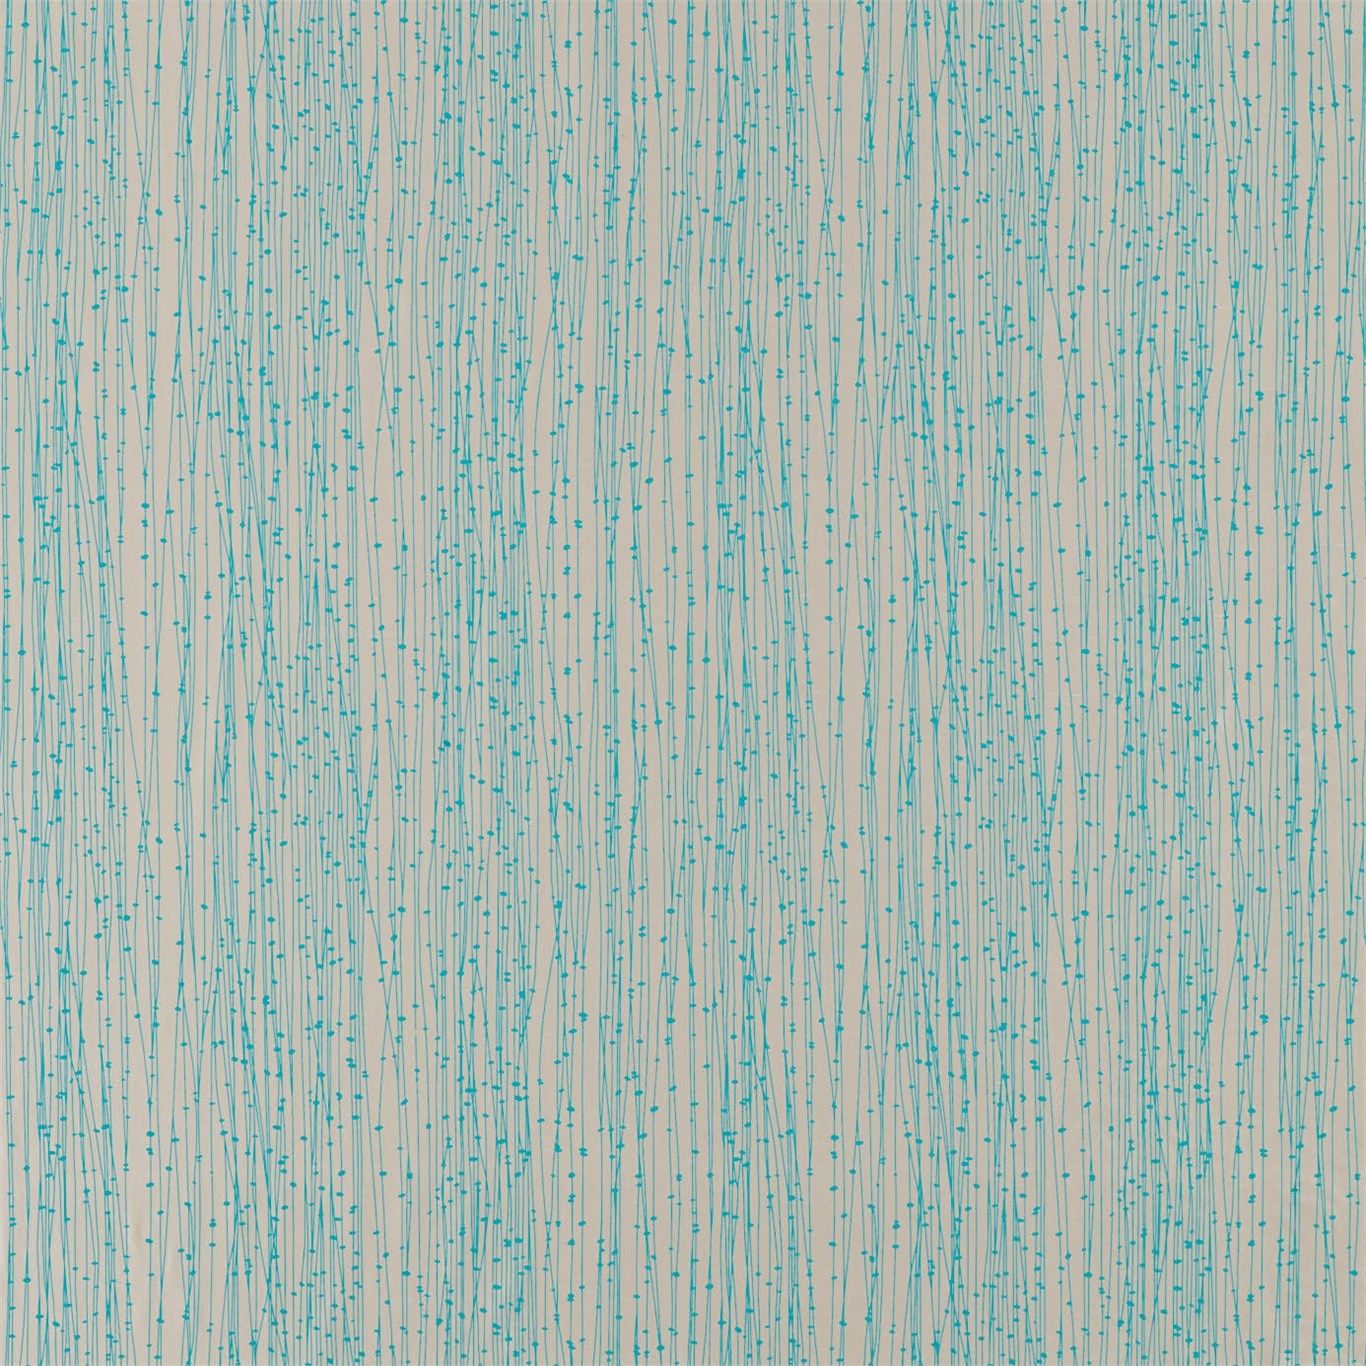 Kalamia Oyster / Teal Fabric by HAR